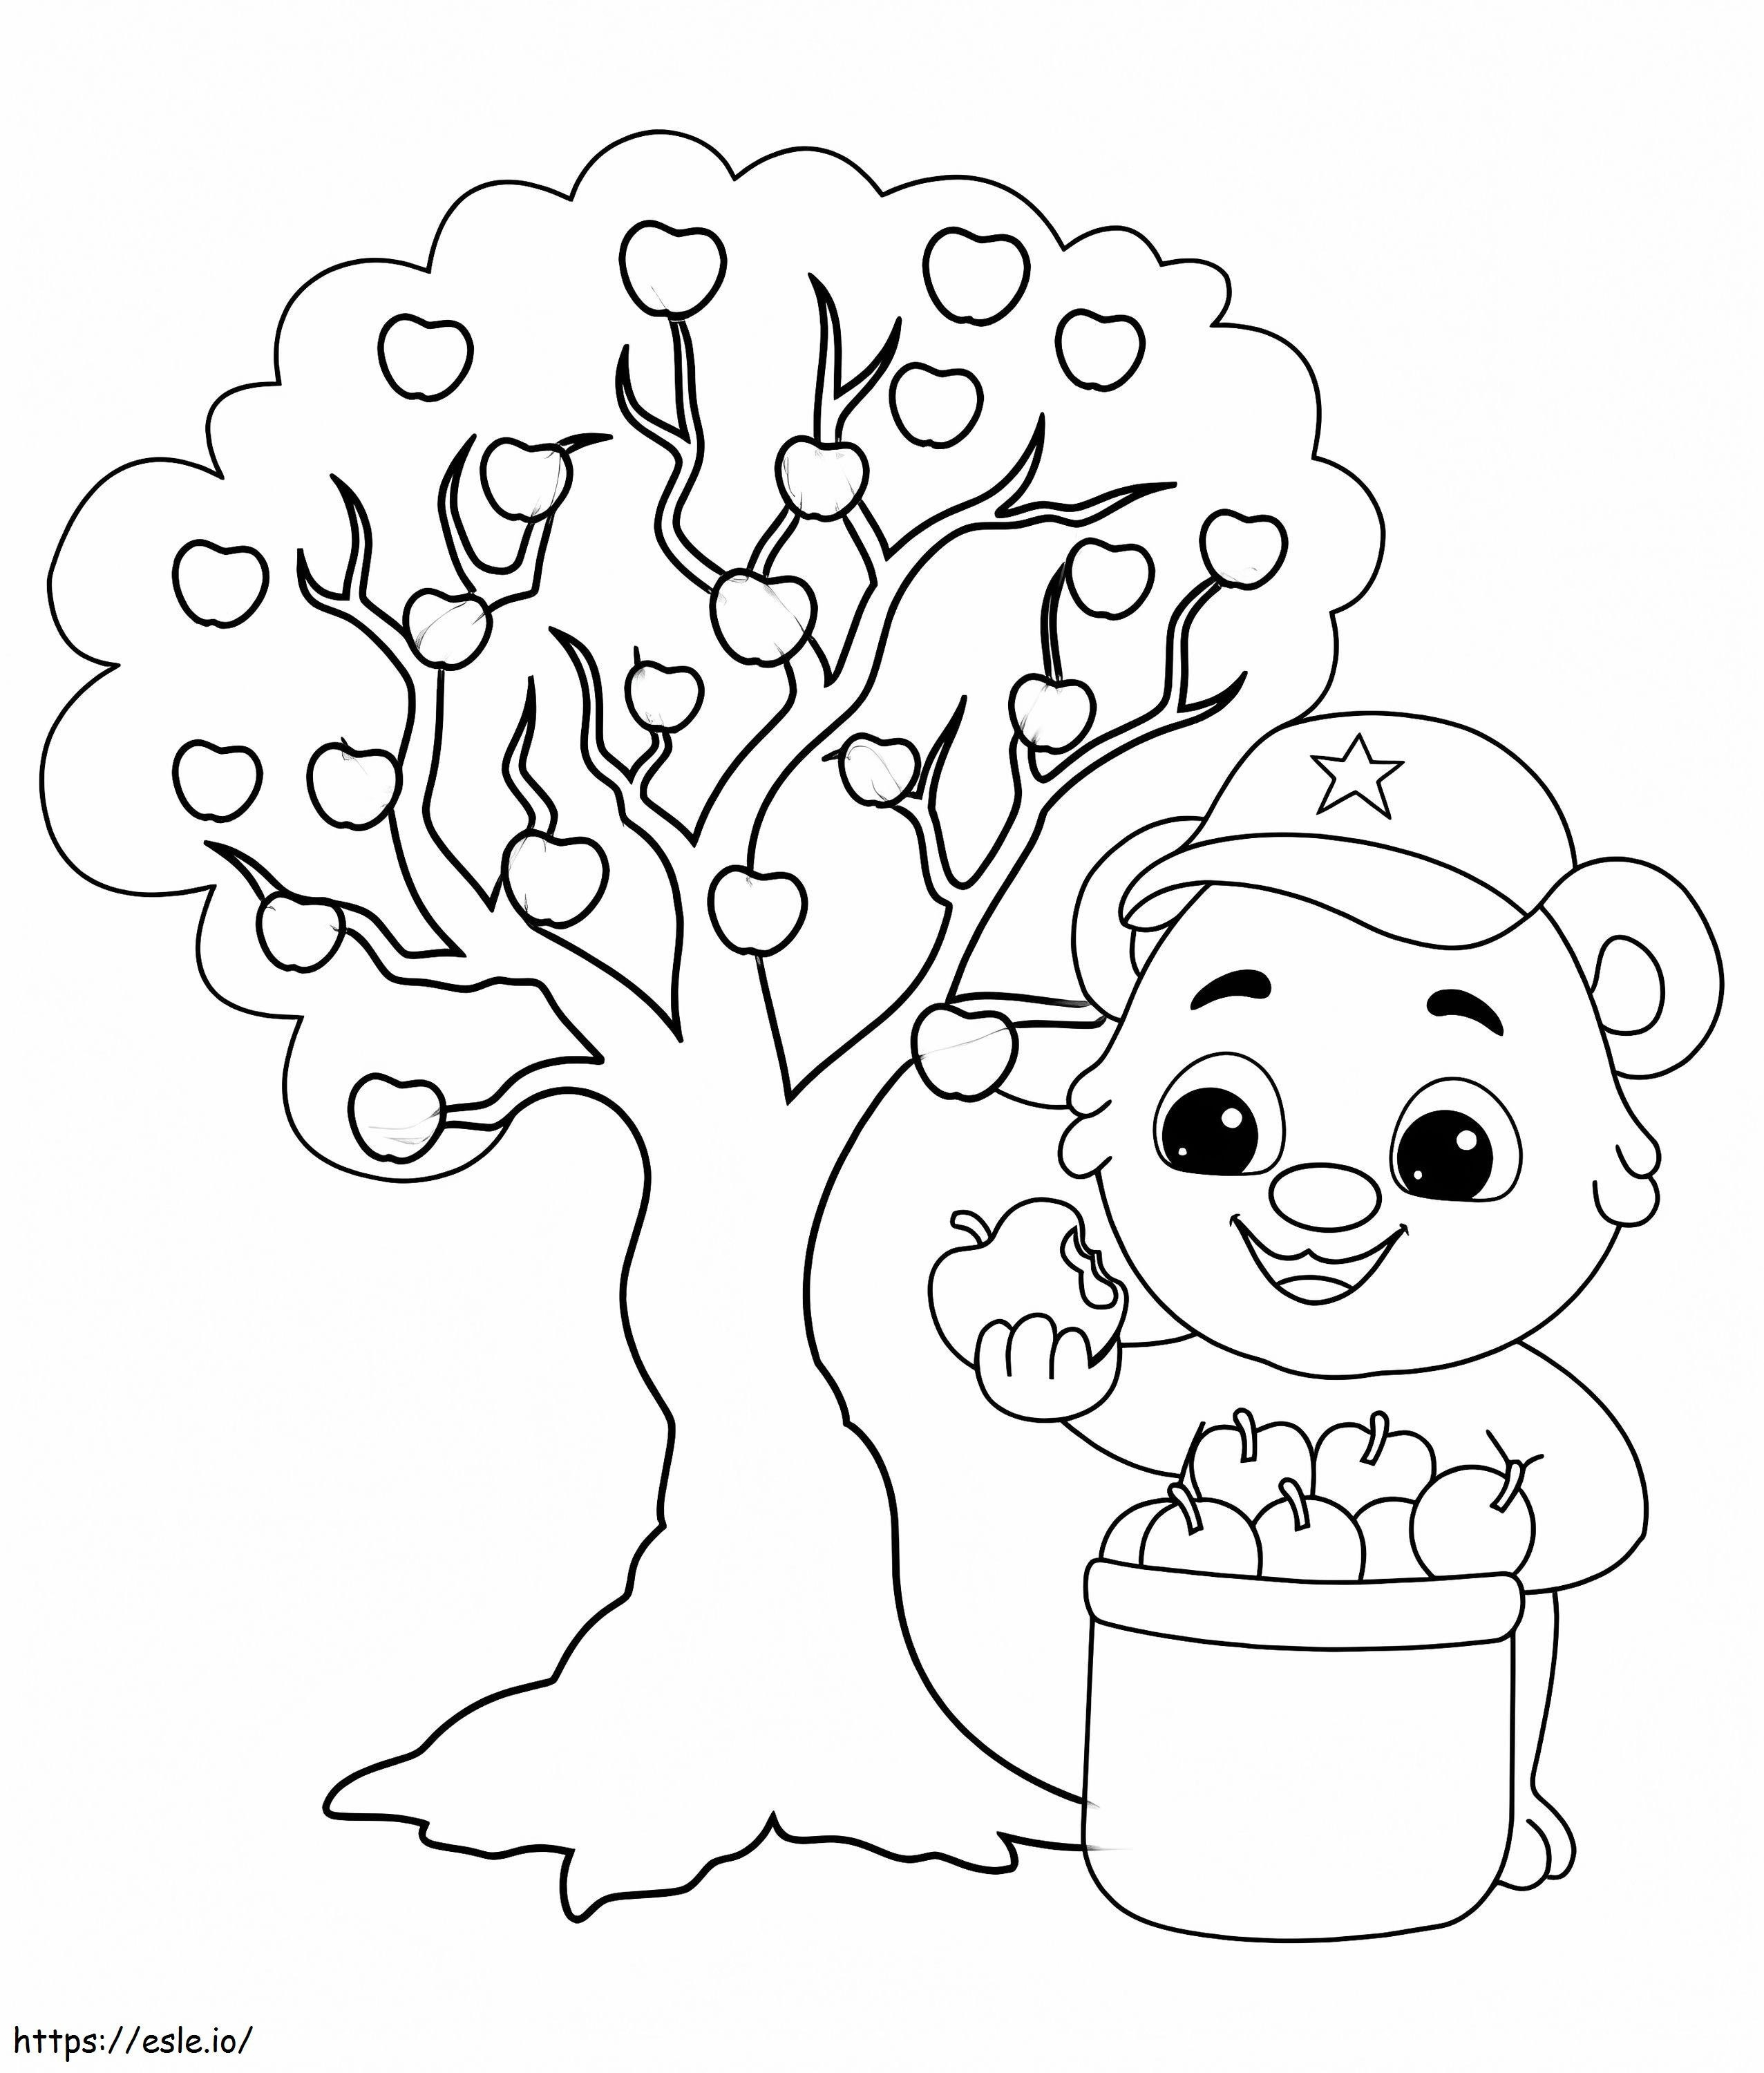 Bear And Tree coloring page